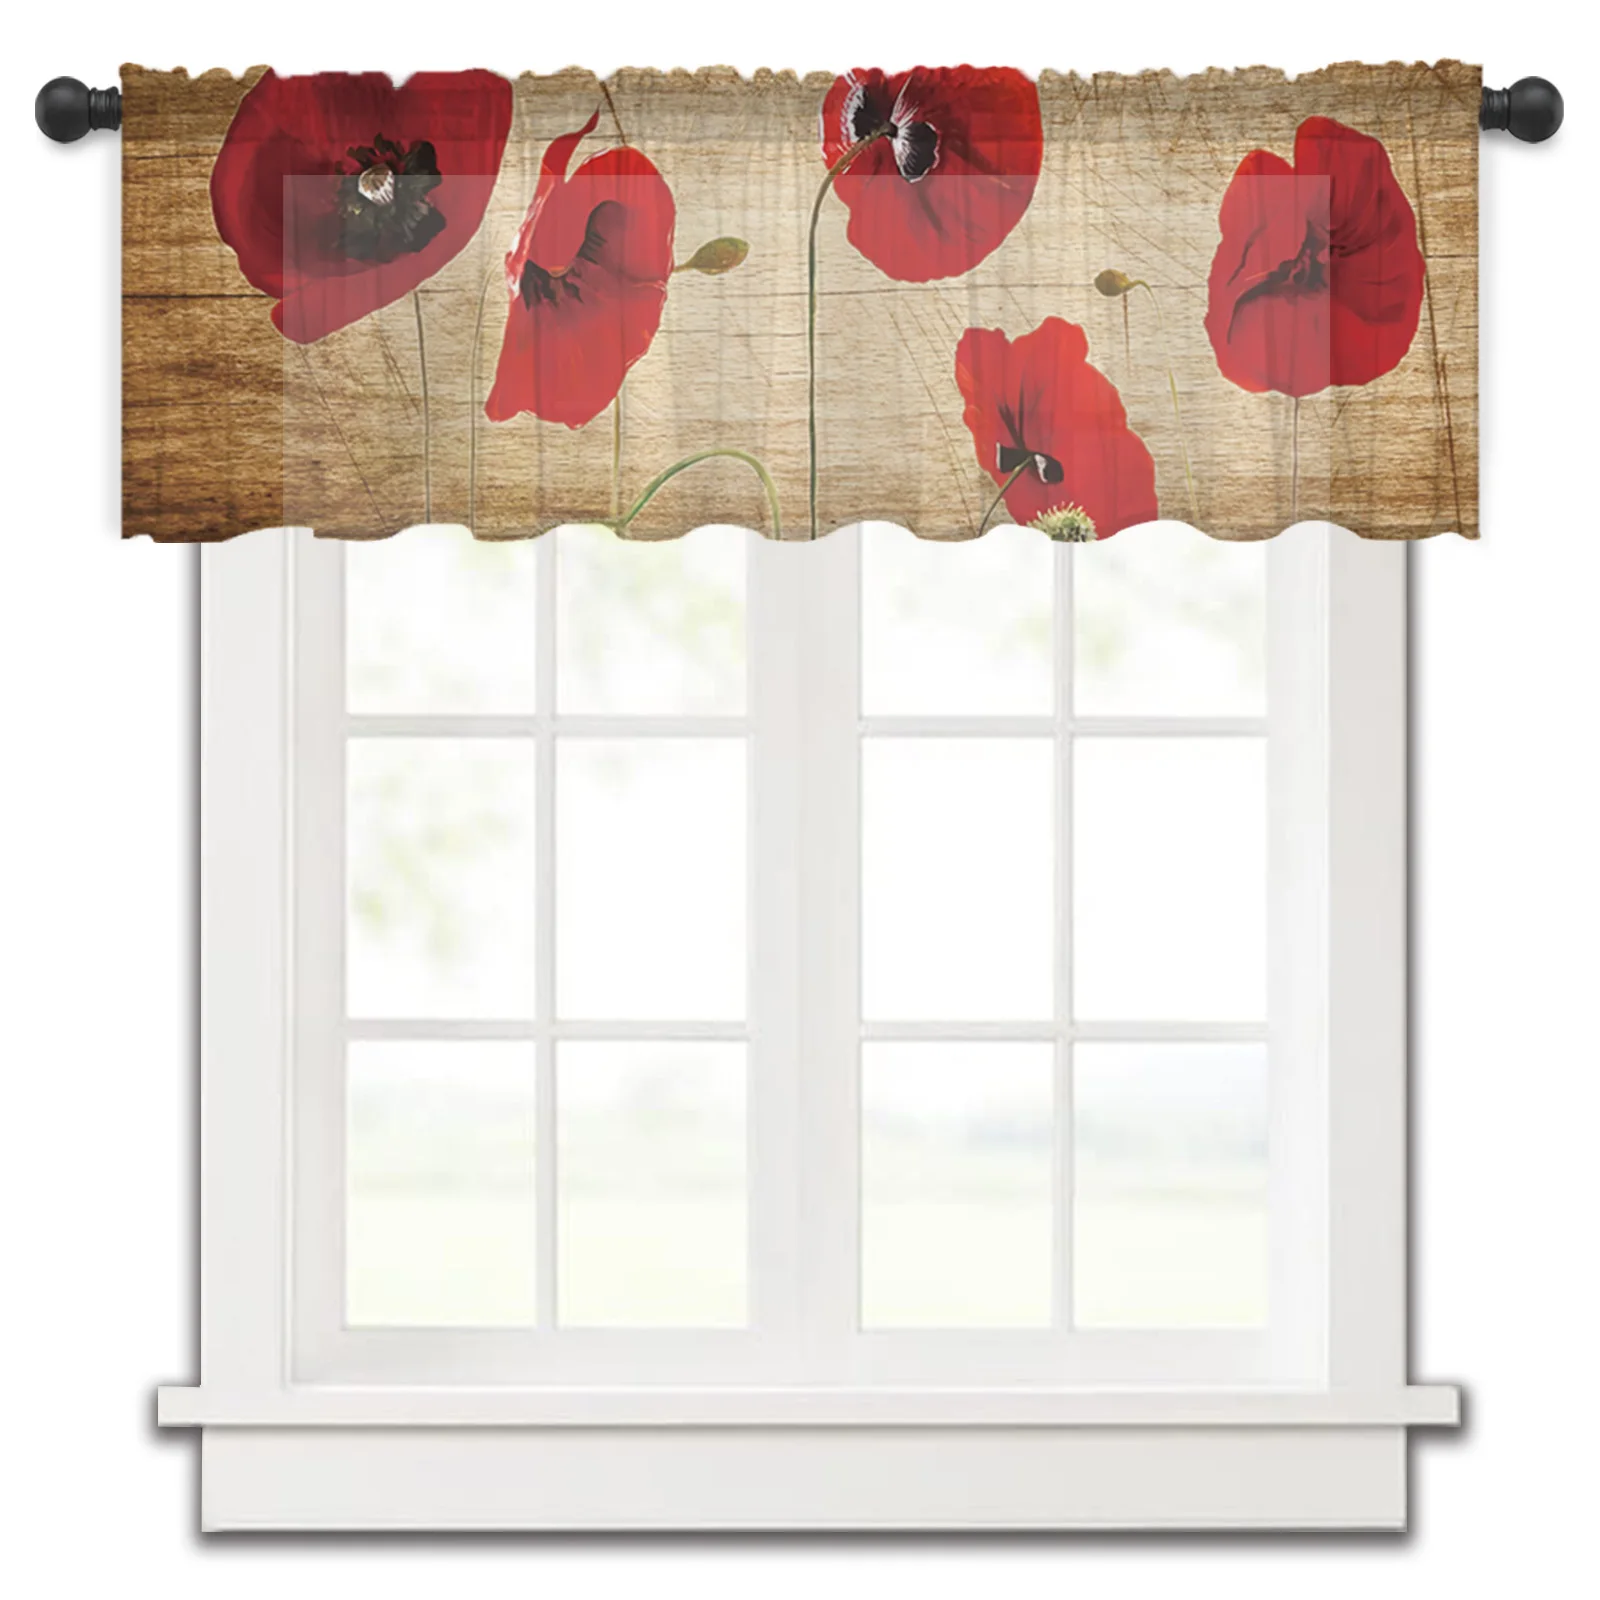 

Poppy Flower Retro Wood Texture Kitchen Small Curtain Tulle Sheer Short Curtain Bedroom Living Room Home Decor Voile Drapes